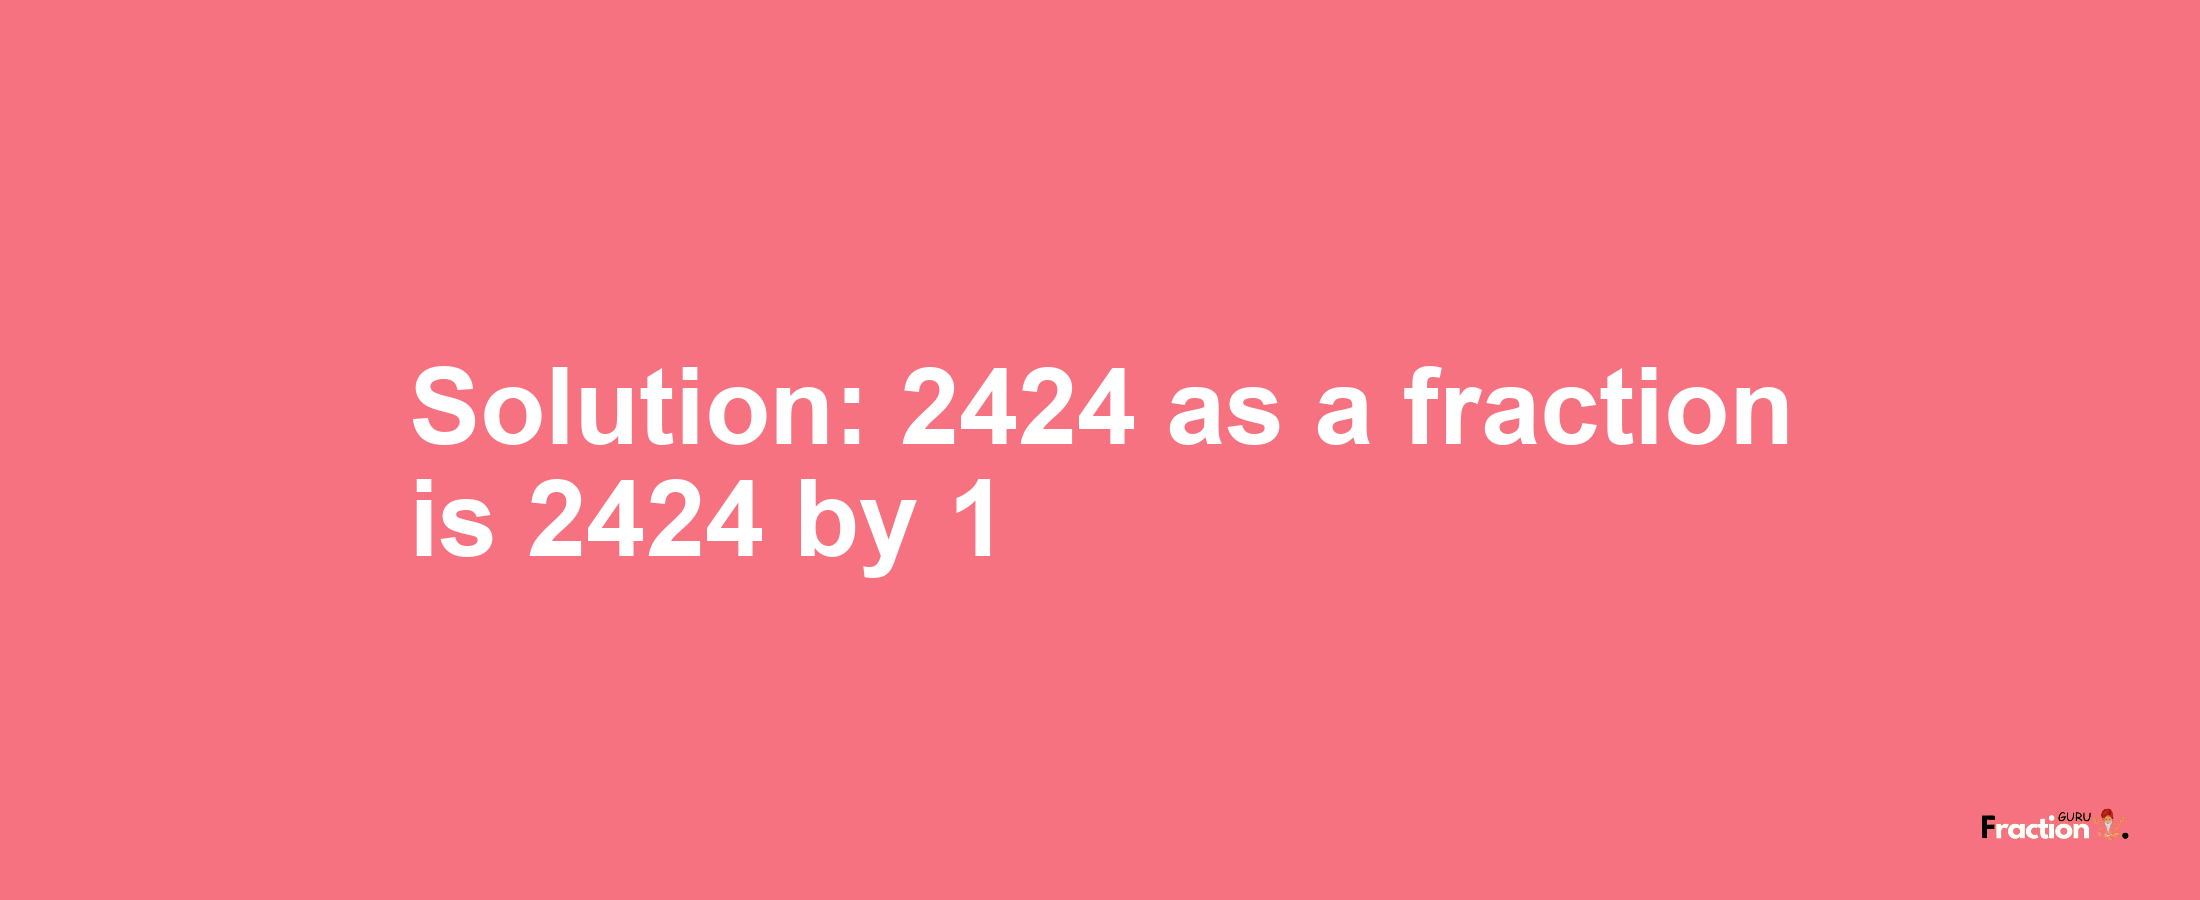 Solution:2424 as a fraction is 2424/1